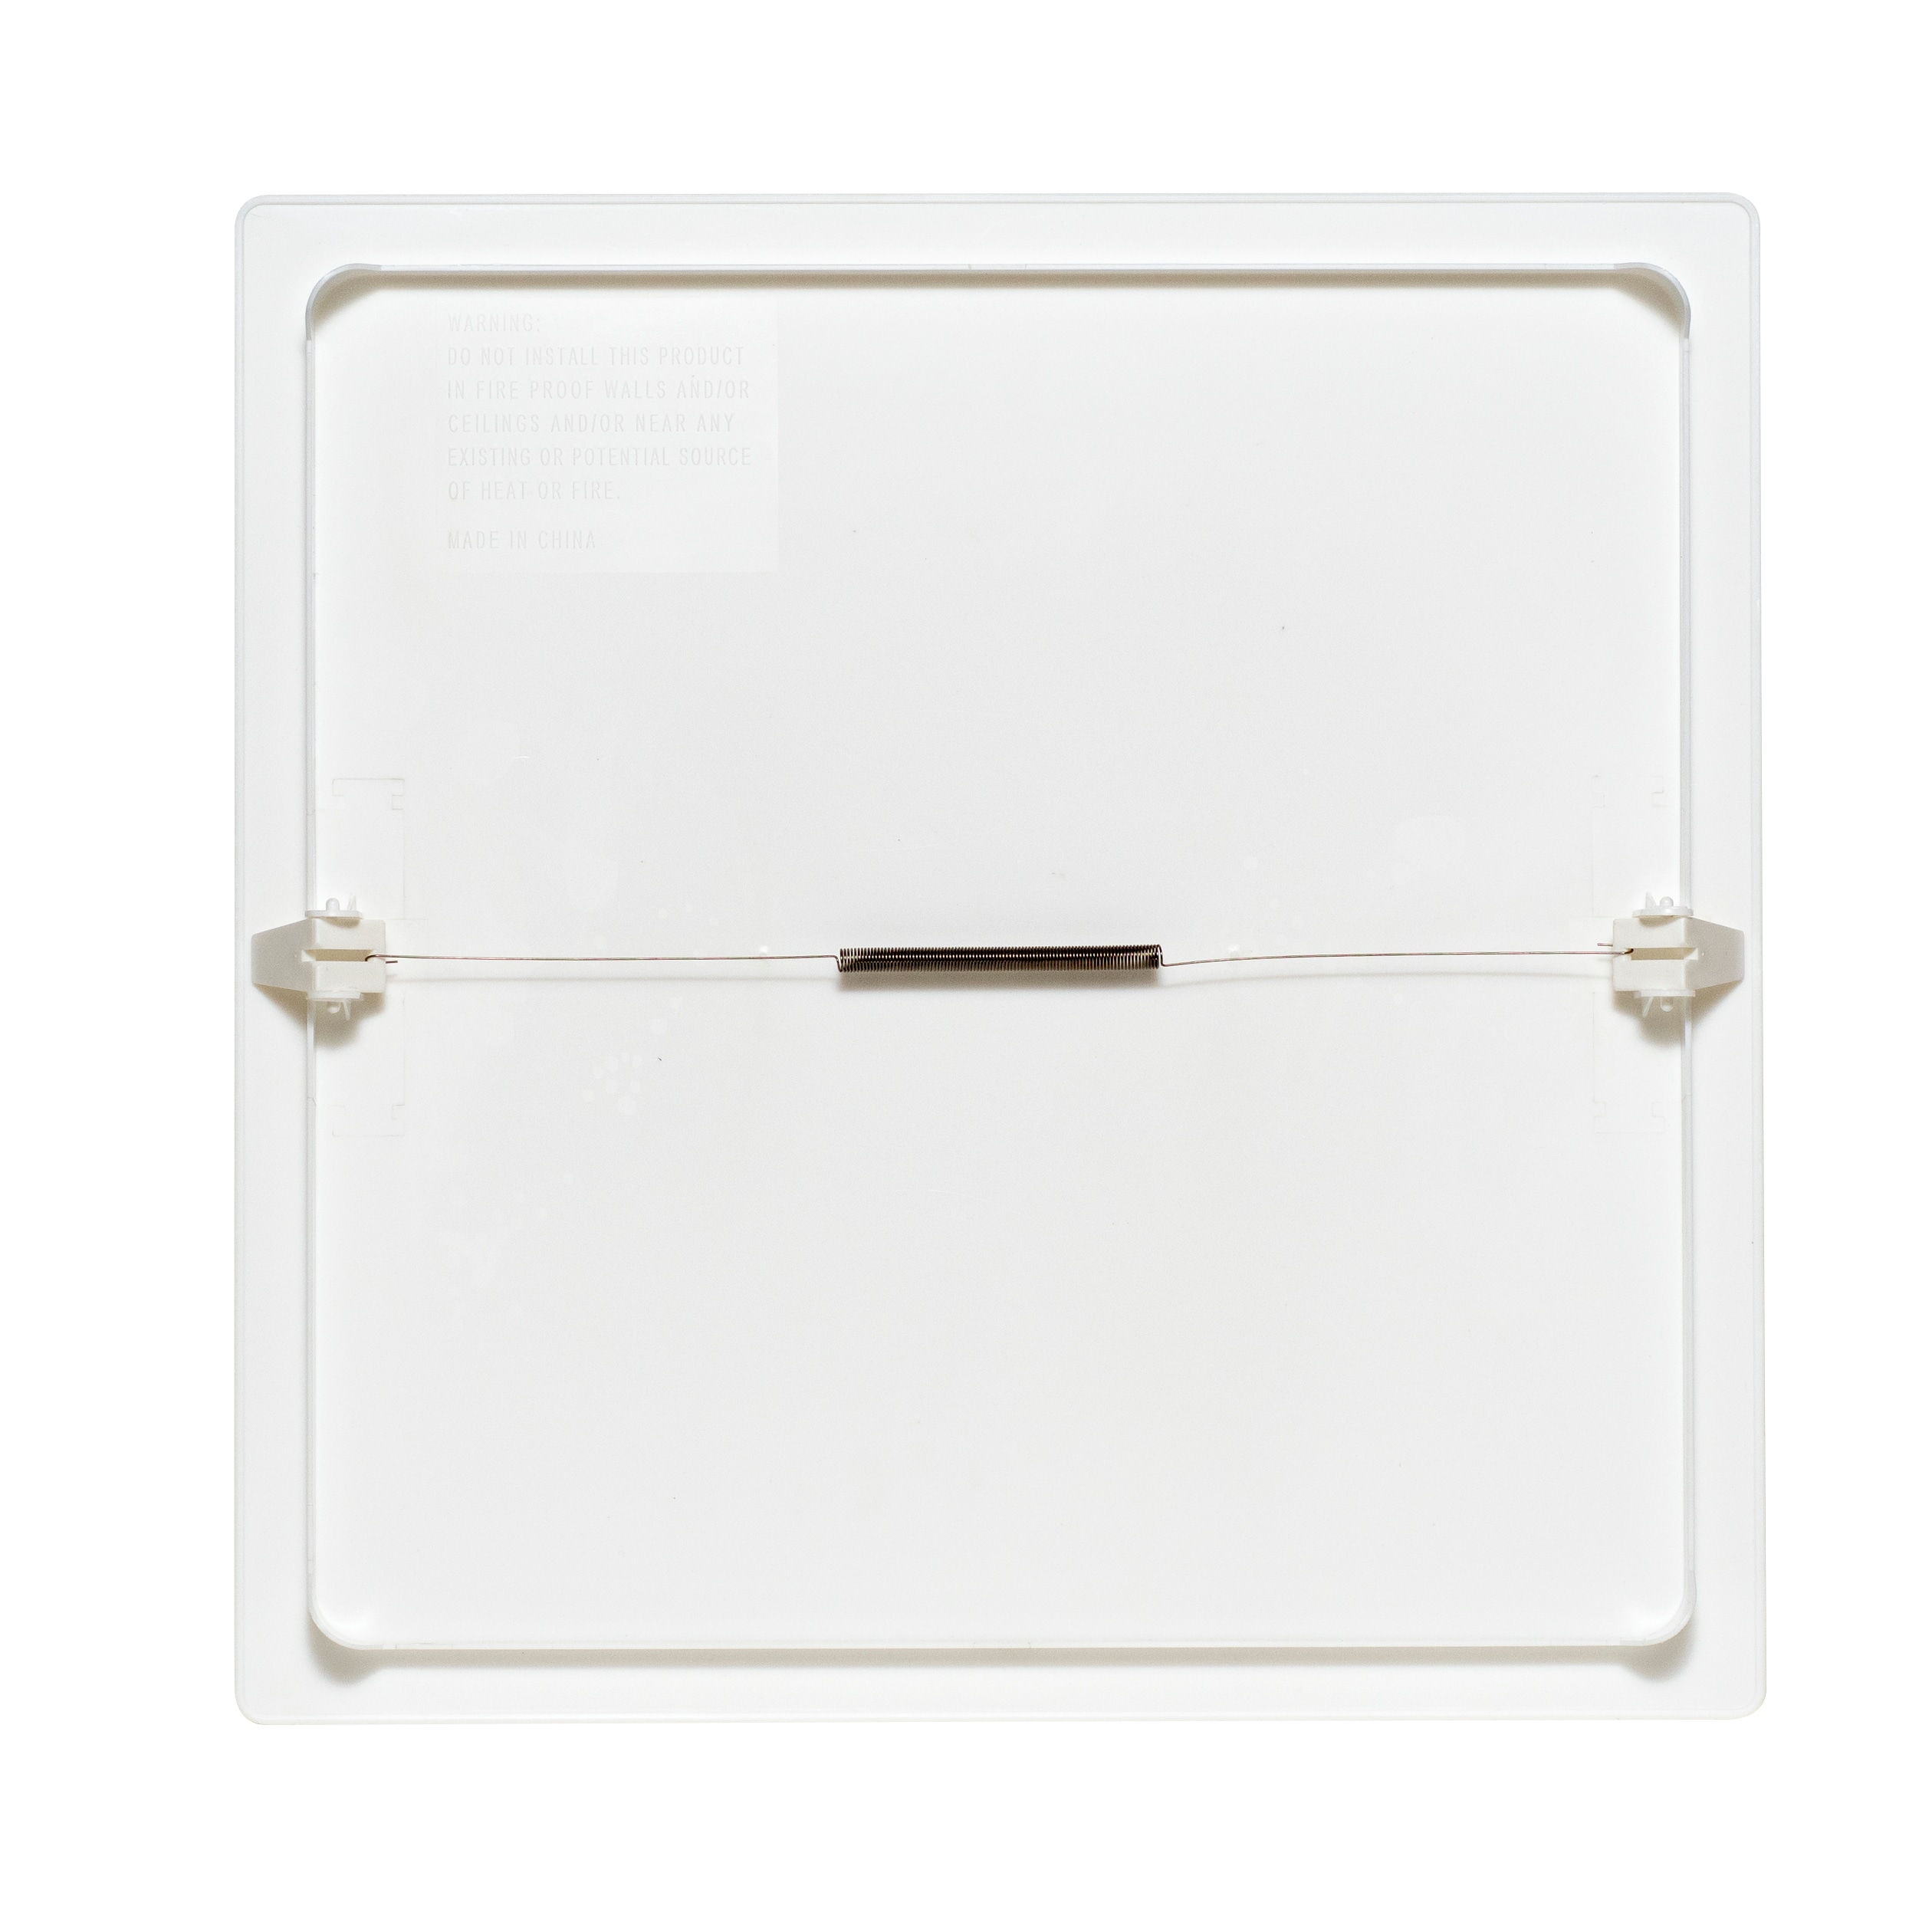 Access Panel Inspection Hatch White 115mm X 165mm Gas Safe Pipes Wiring Stop for sale online 